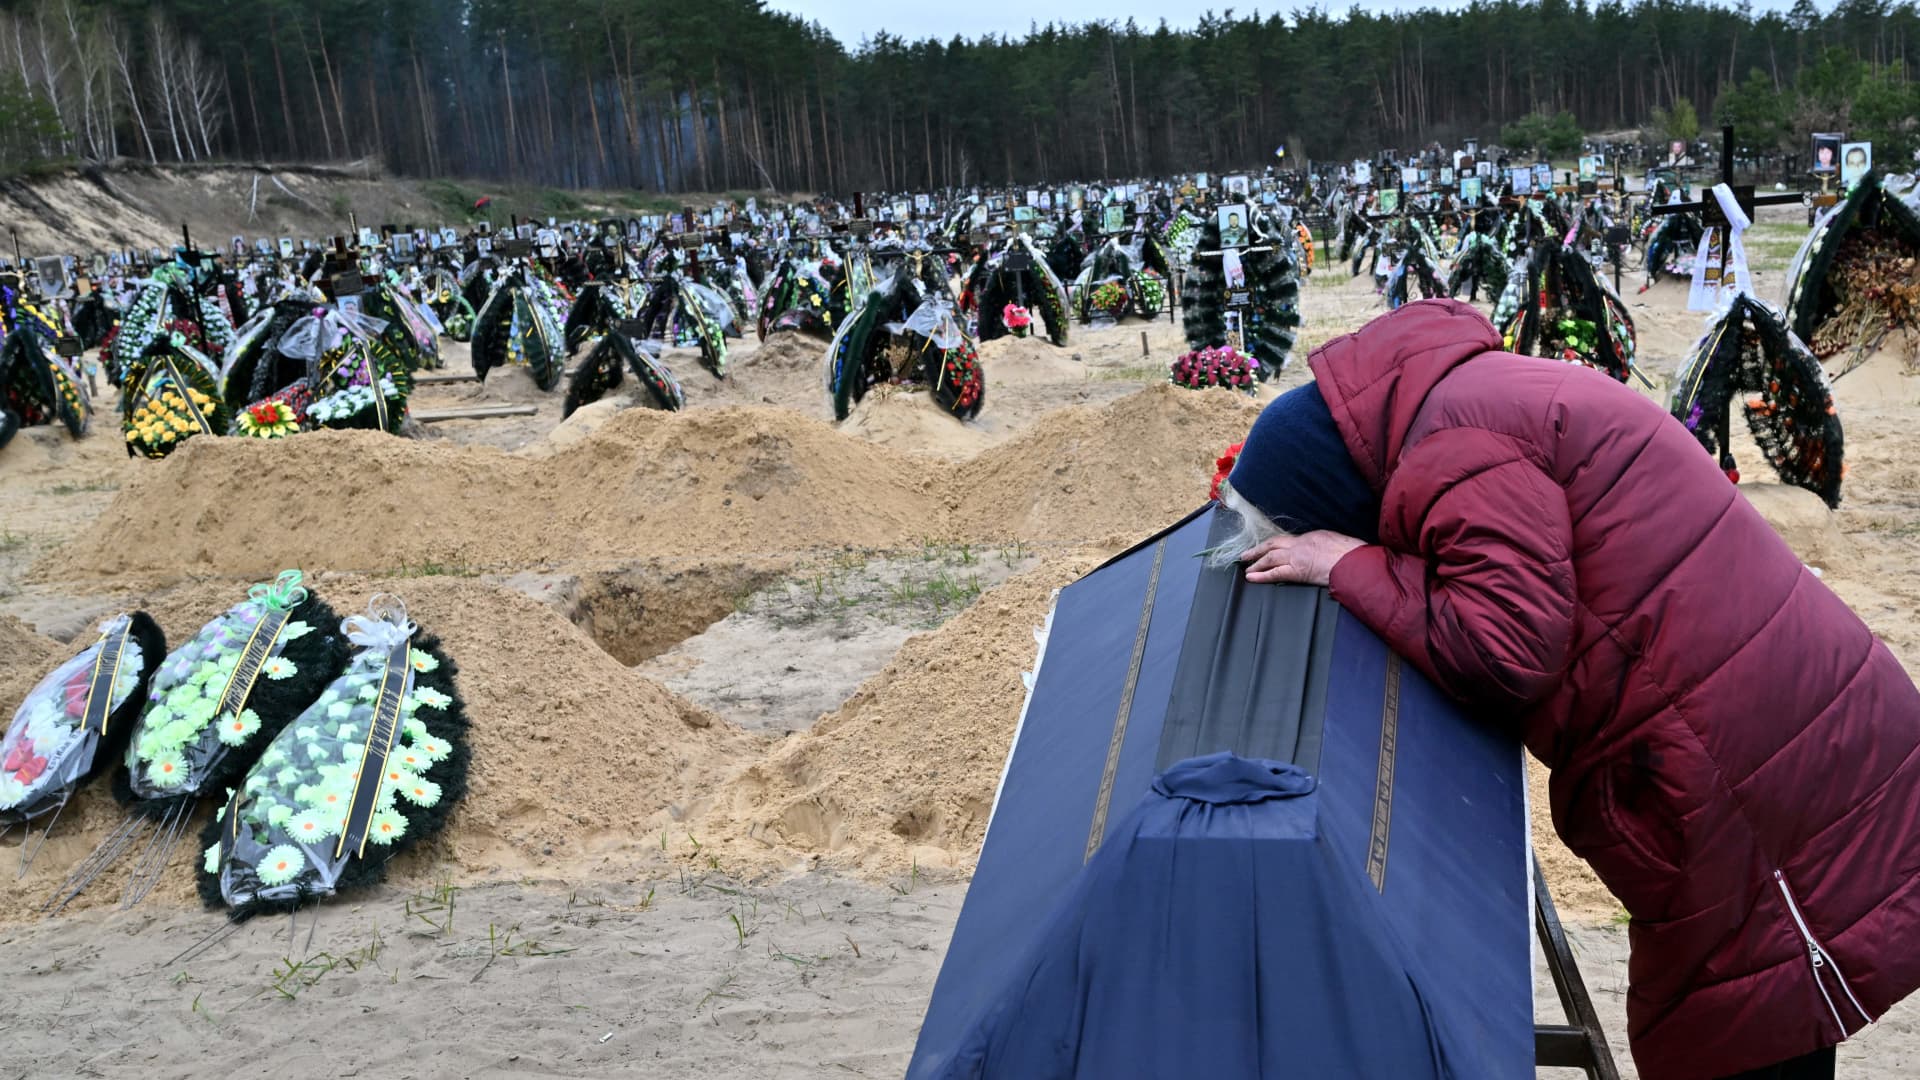 A woman reacts next to the coffin of her husband during a funeral at a cemetery in Irpin on April 19, 2022, where there are at least three rows of new graves for those killed during the Russian invasion of Ukraine.